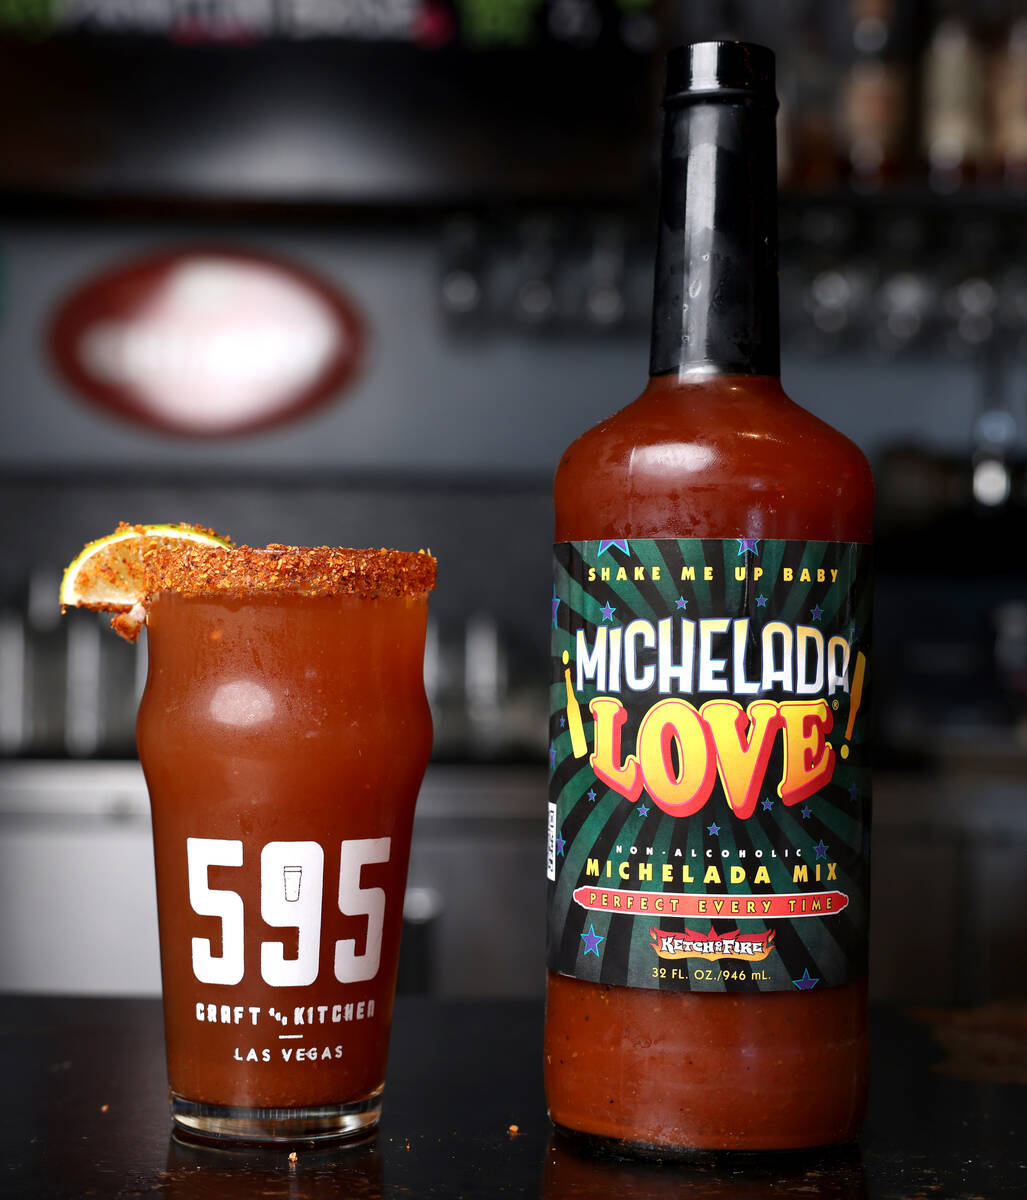 Michelada cocktail made with Michelada Love mix at 595 Craft and Kitchen in Las Vegas Wednesday ...